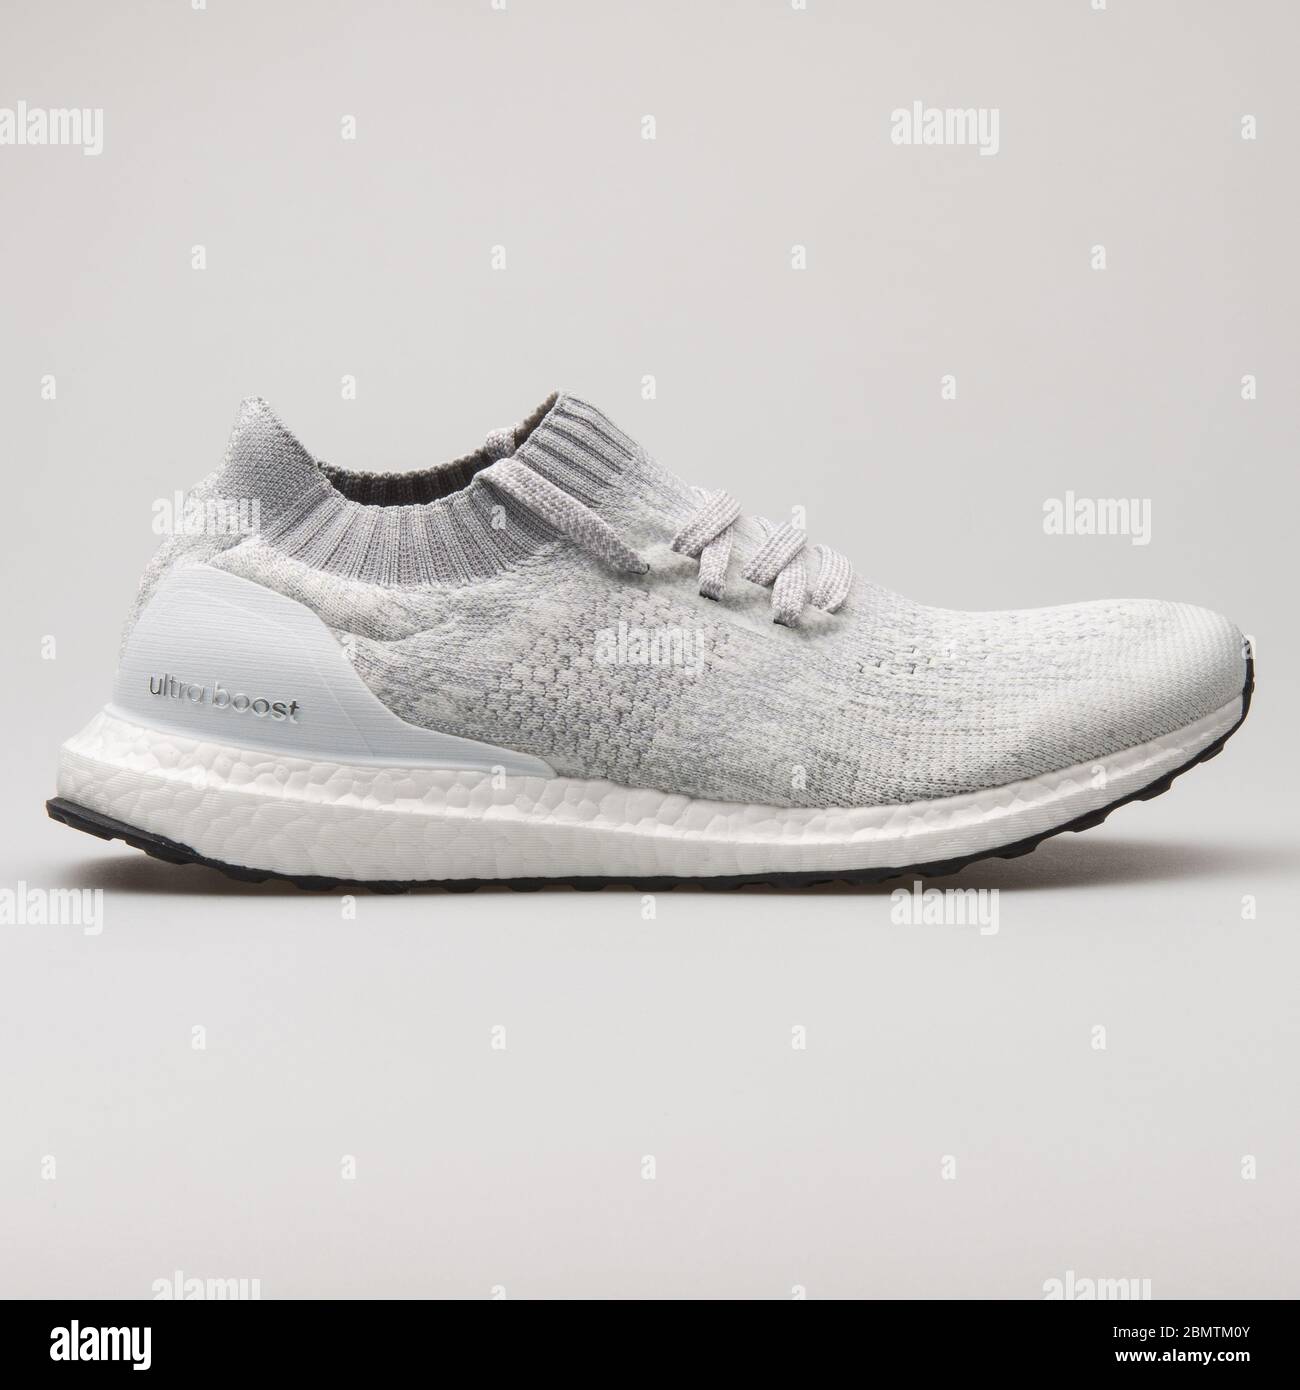 VIENNA, AUSTRIA - FEBRUARY 19, 2018: Adidas Ultra Boost Uncaged grey and  white sneaker on white background Stock Photo - Alamy